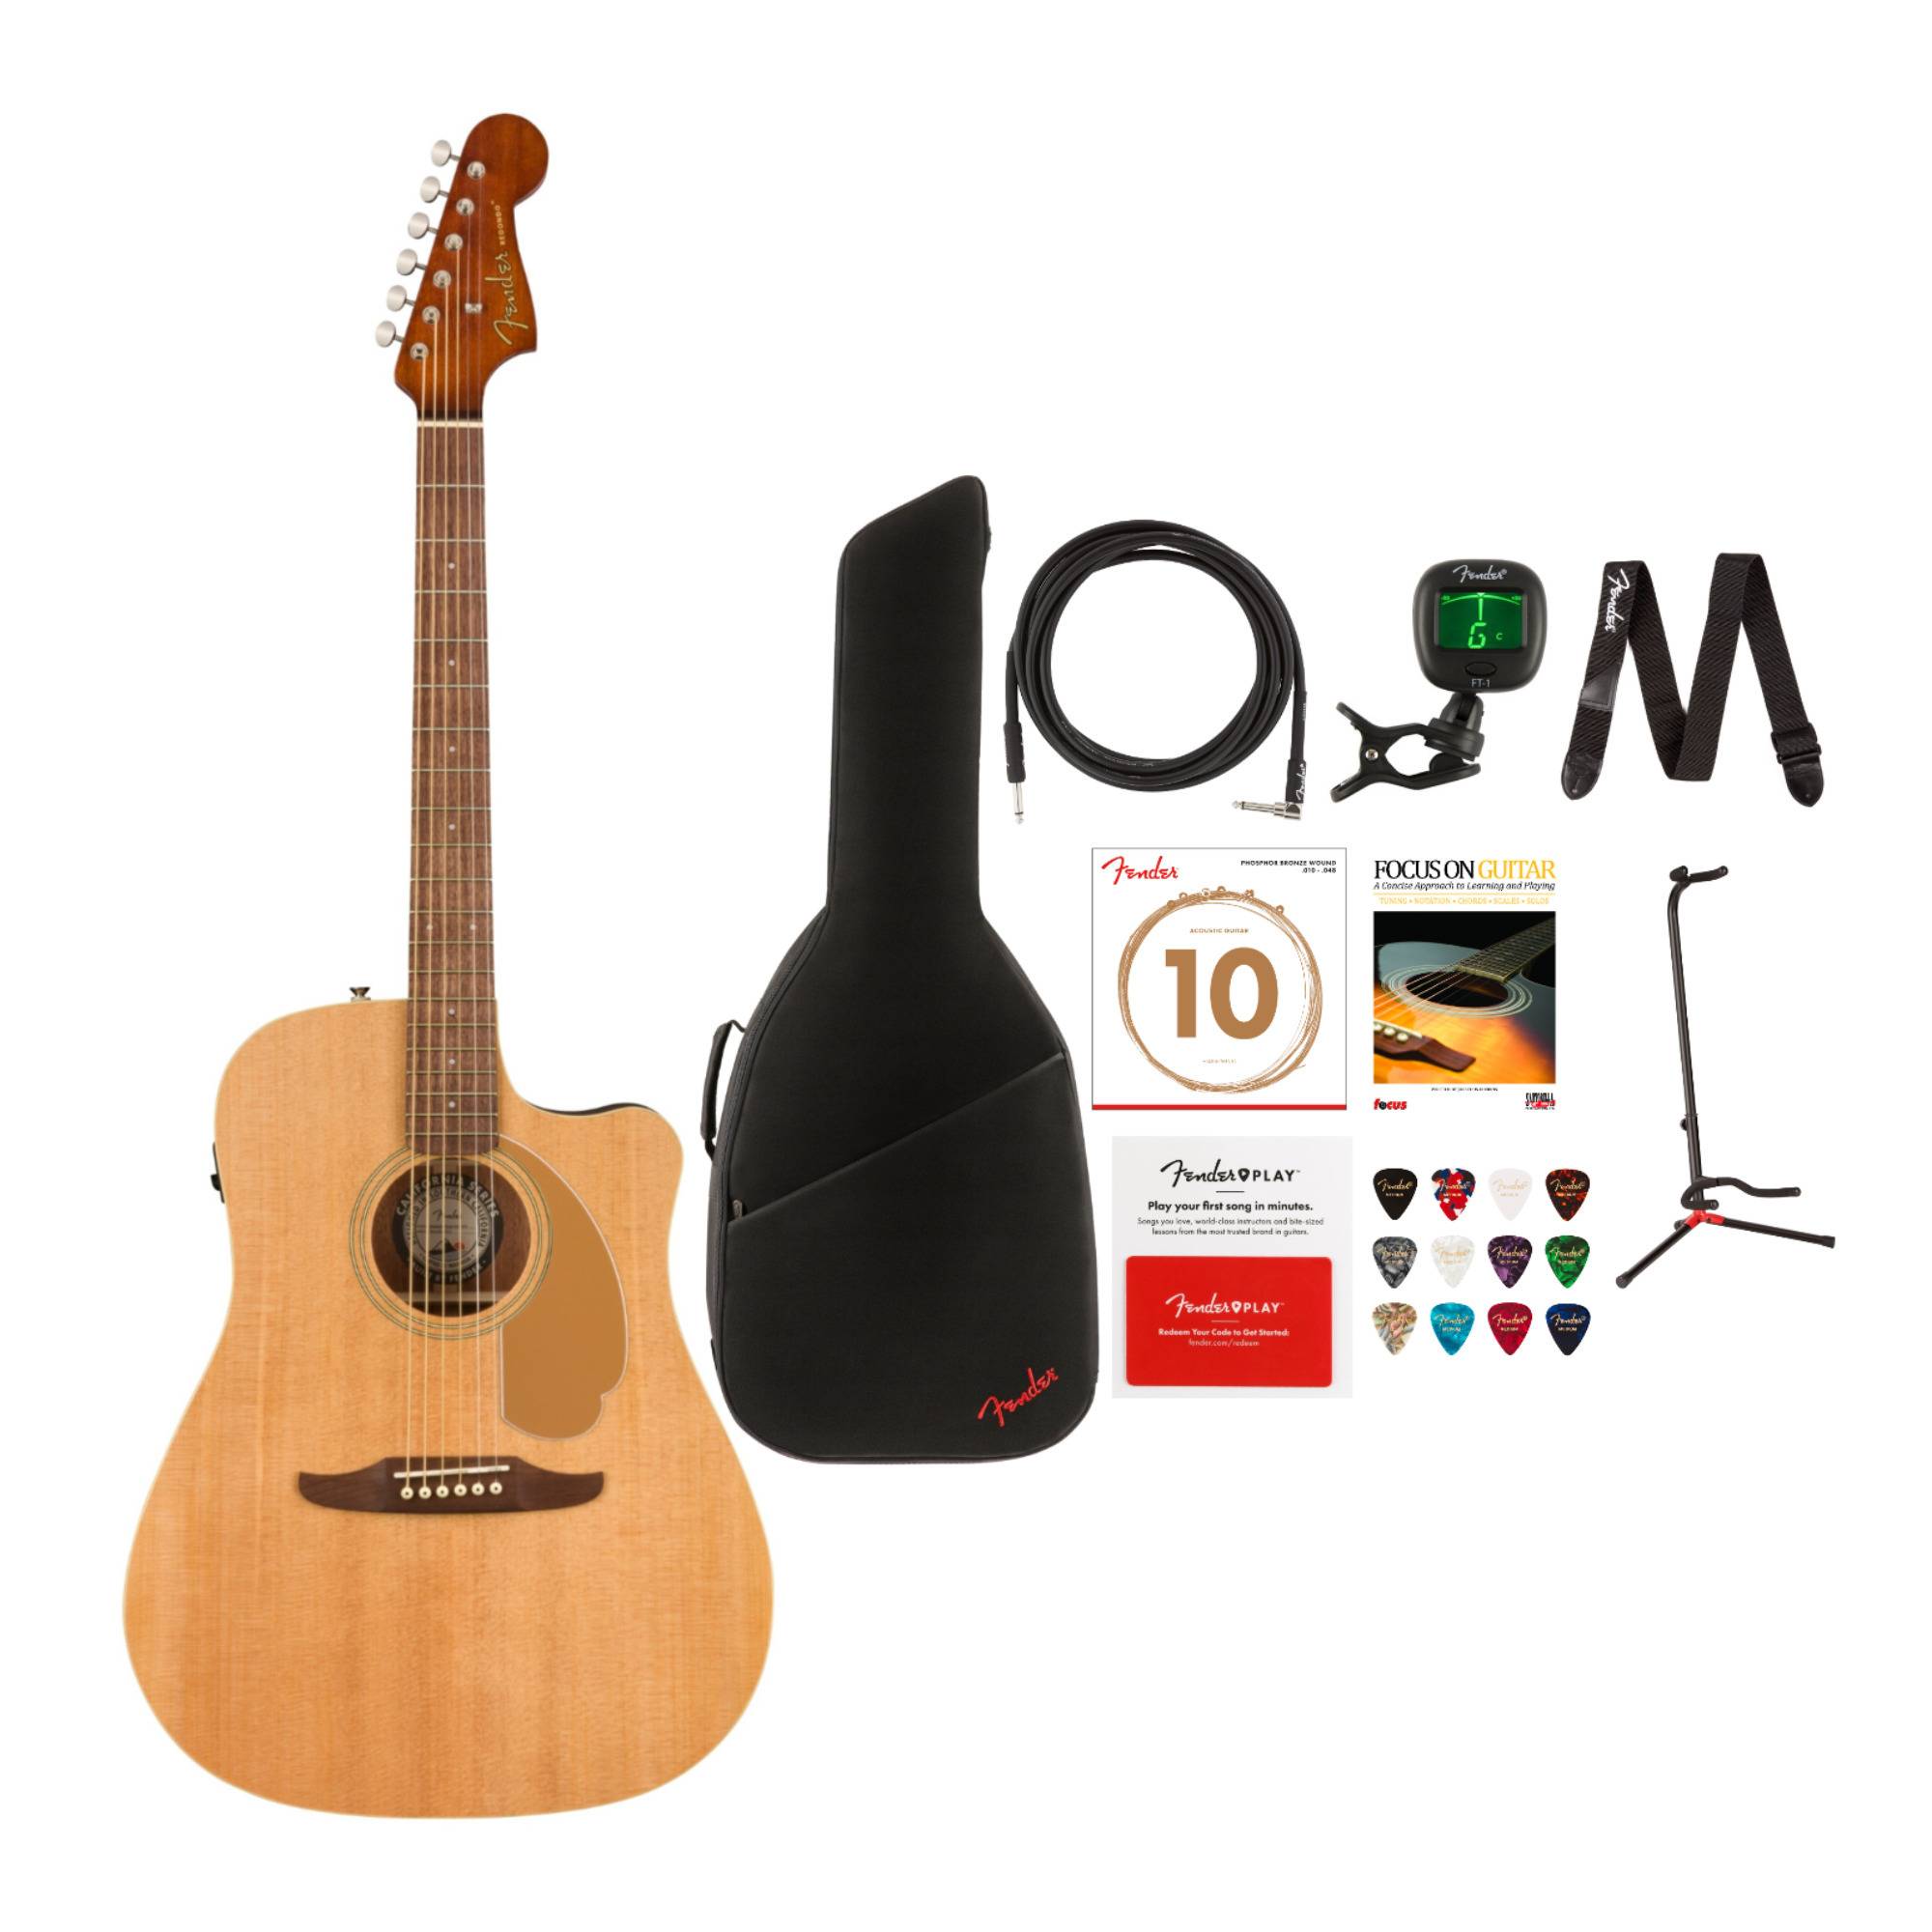 Fender Redondo Player 6-String Acoustic Guitar Value Bundle (Natural, Right-Hand)